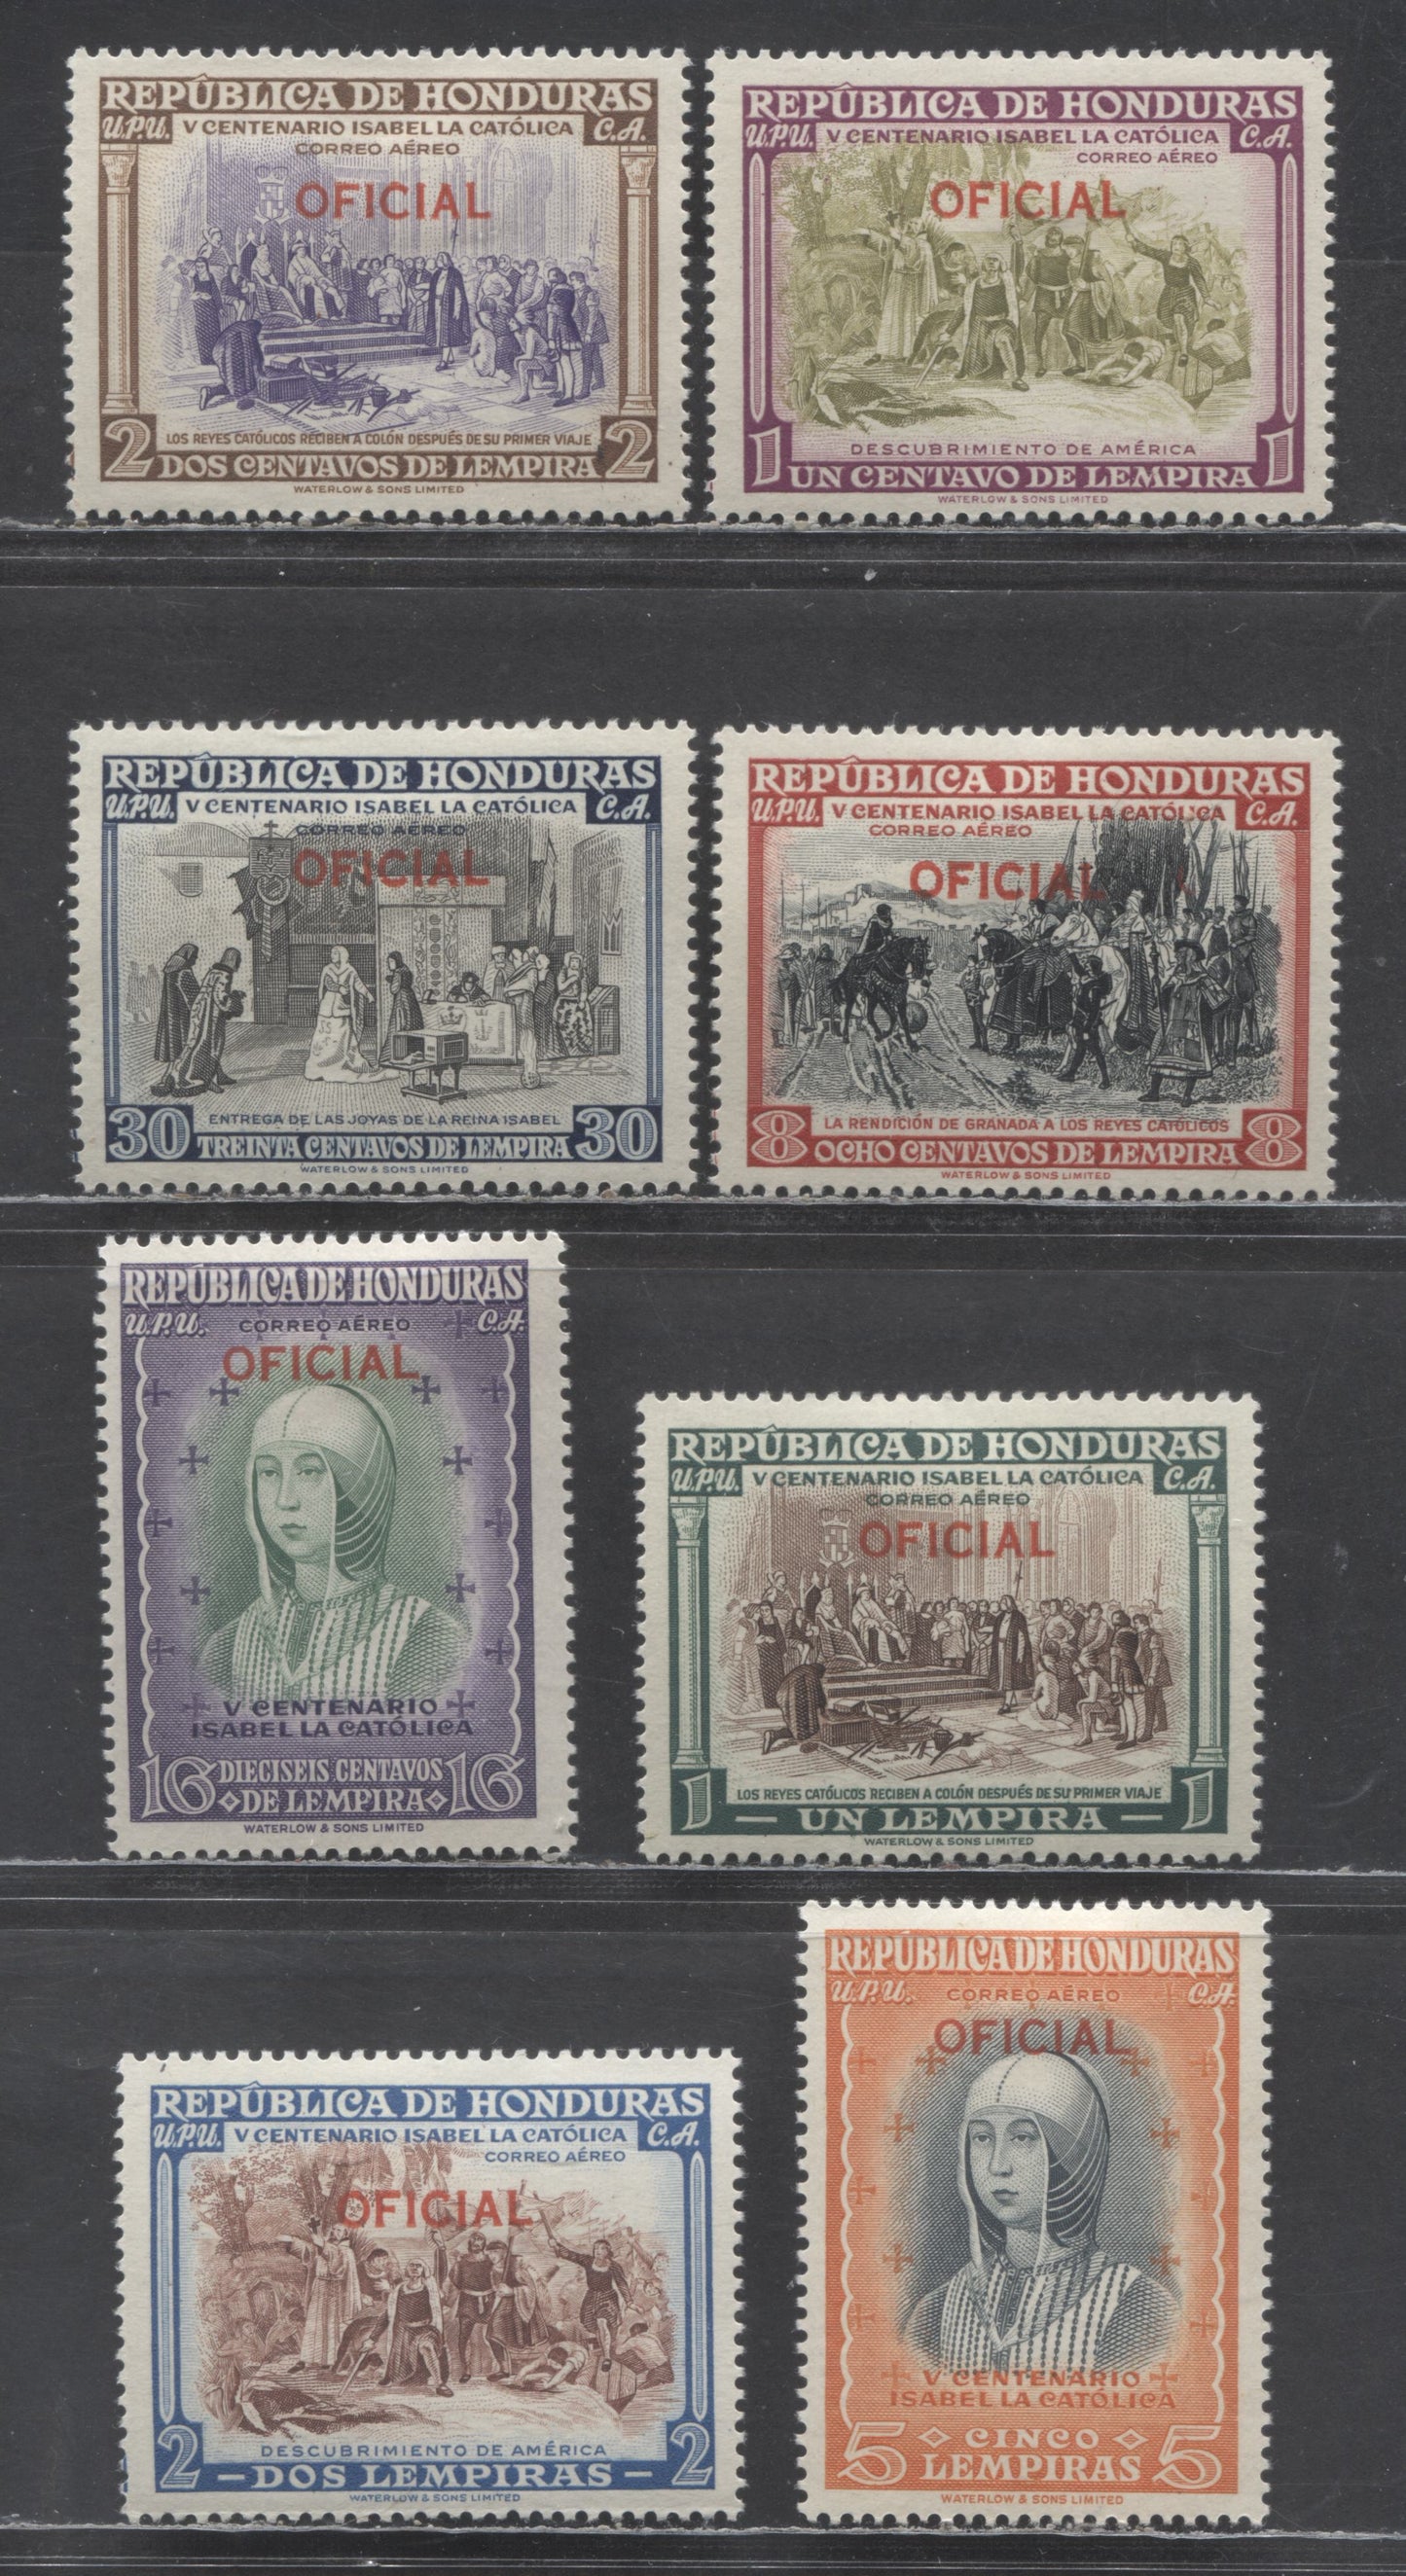 Lot 86 Honduras SC#CO52-CO59 1952 Air Post Official Issue, 8 VFOG Singles, Click on Listing to See ALL Pictures, Estimated Value $8